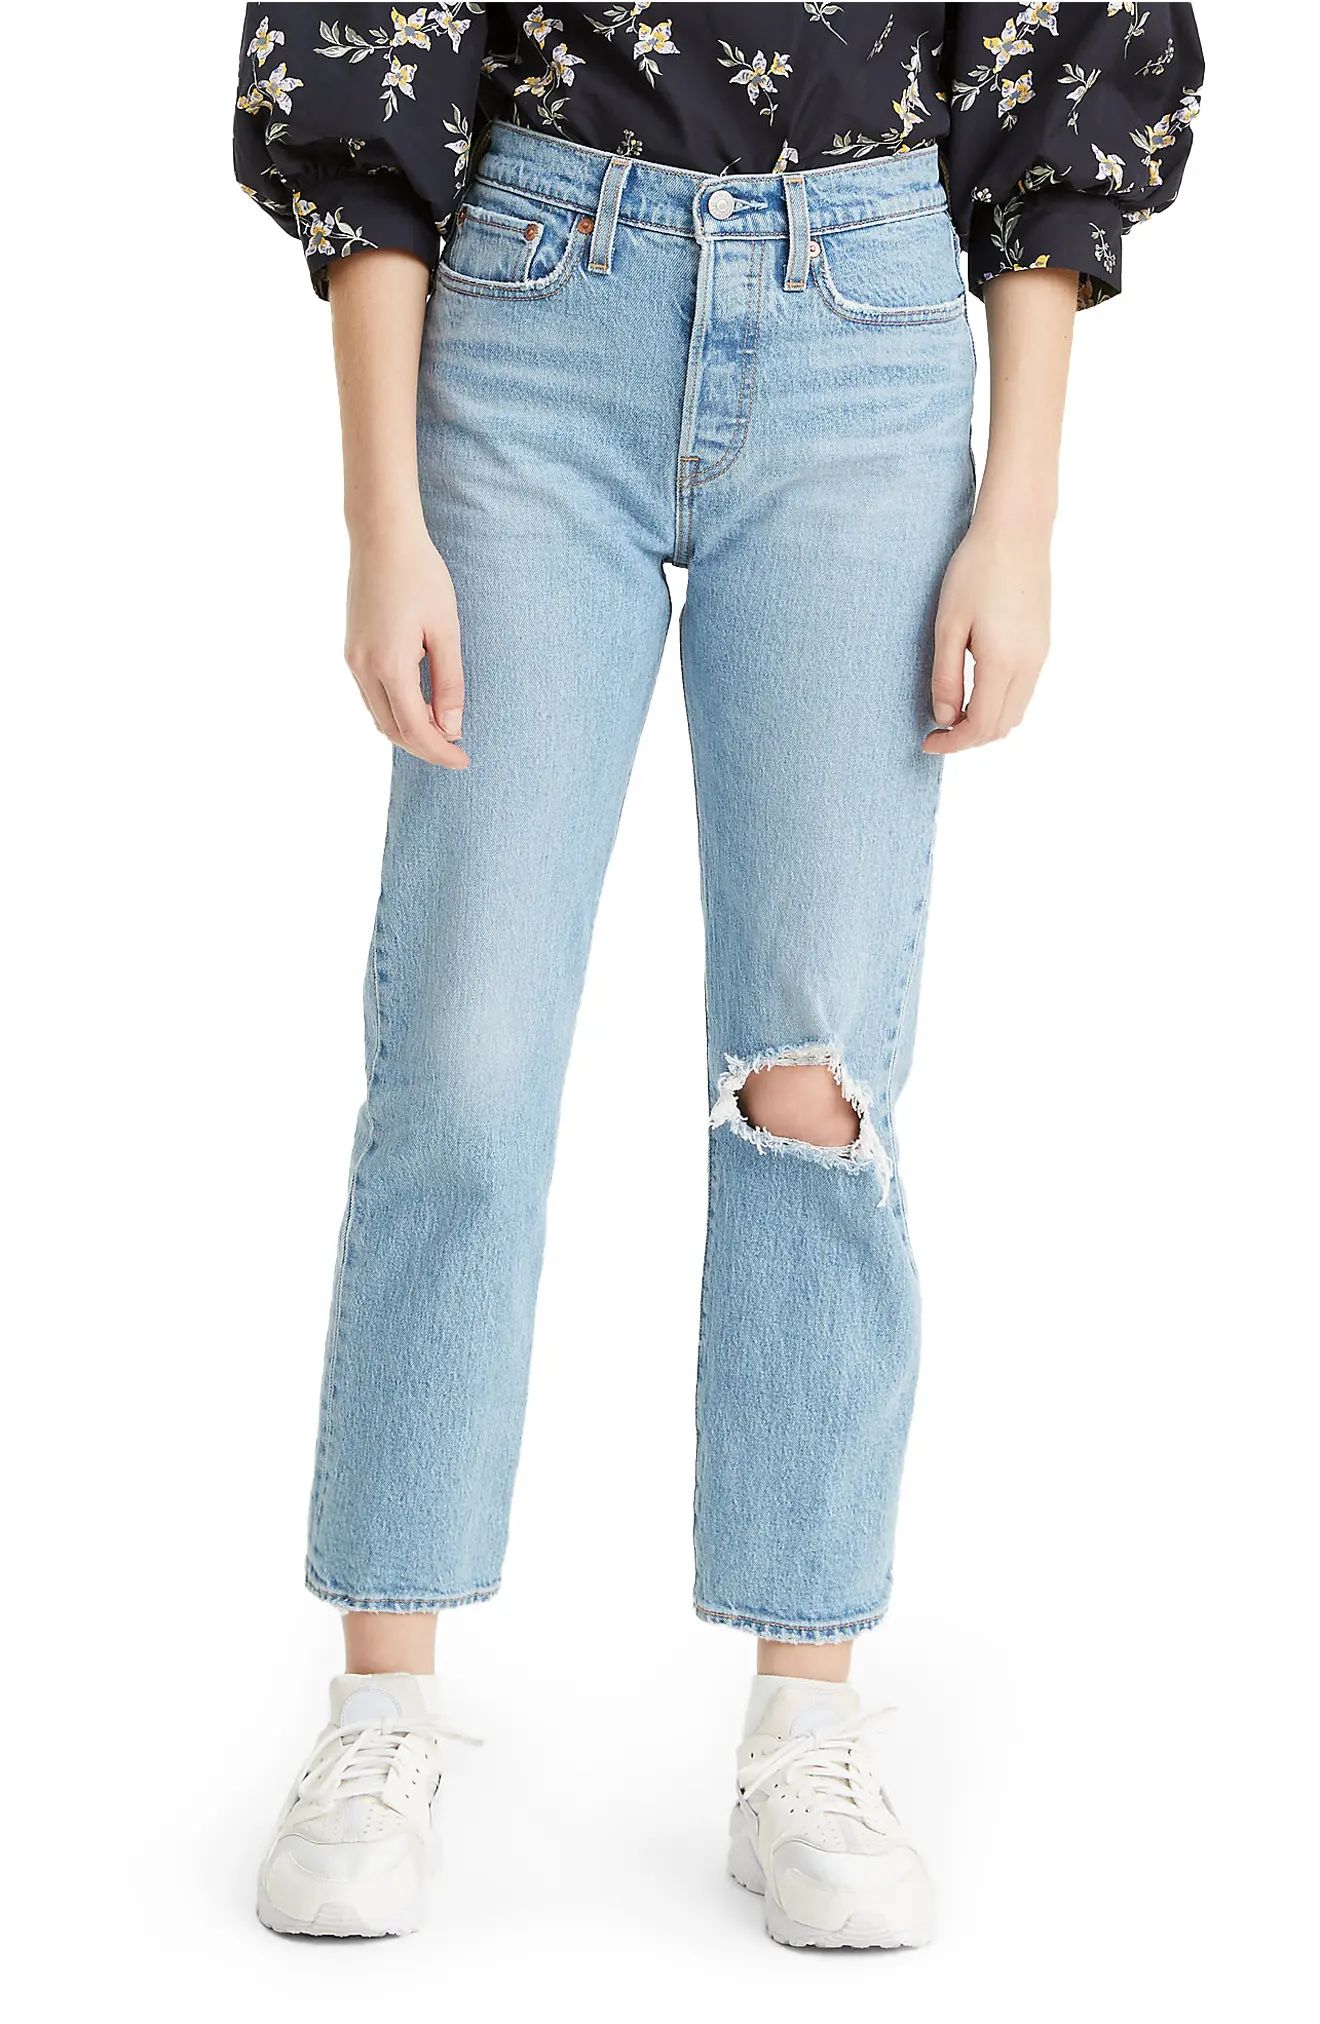 levi's Wedgie Ripped High Waist Jeans, Size 27 X 26 in Tango Fray at Nordstrom | Nordstrom